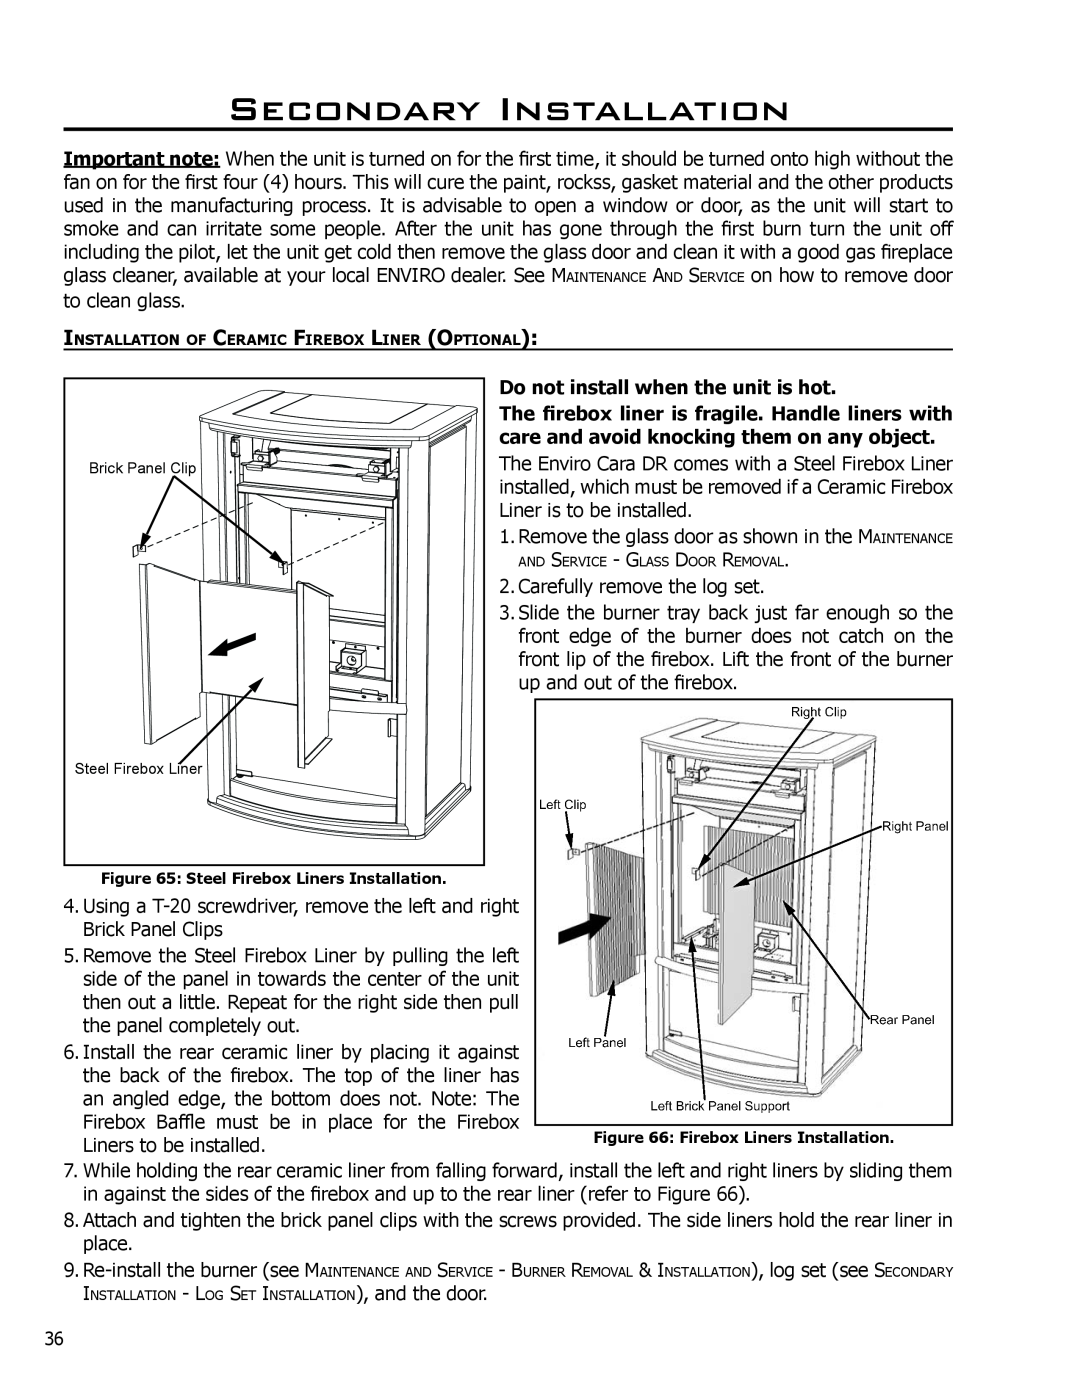 Enviro Cara owner manual Do not install when the unit is hot, Secondary Installation, Steel Firebox Liners Installation 